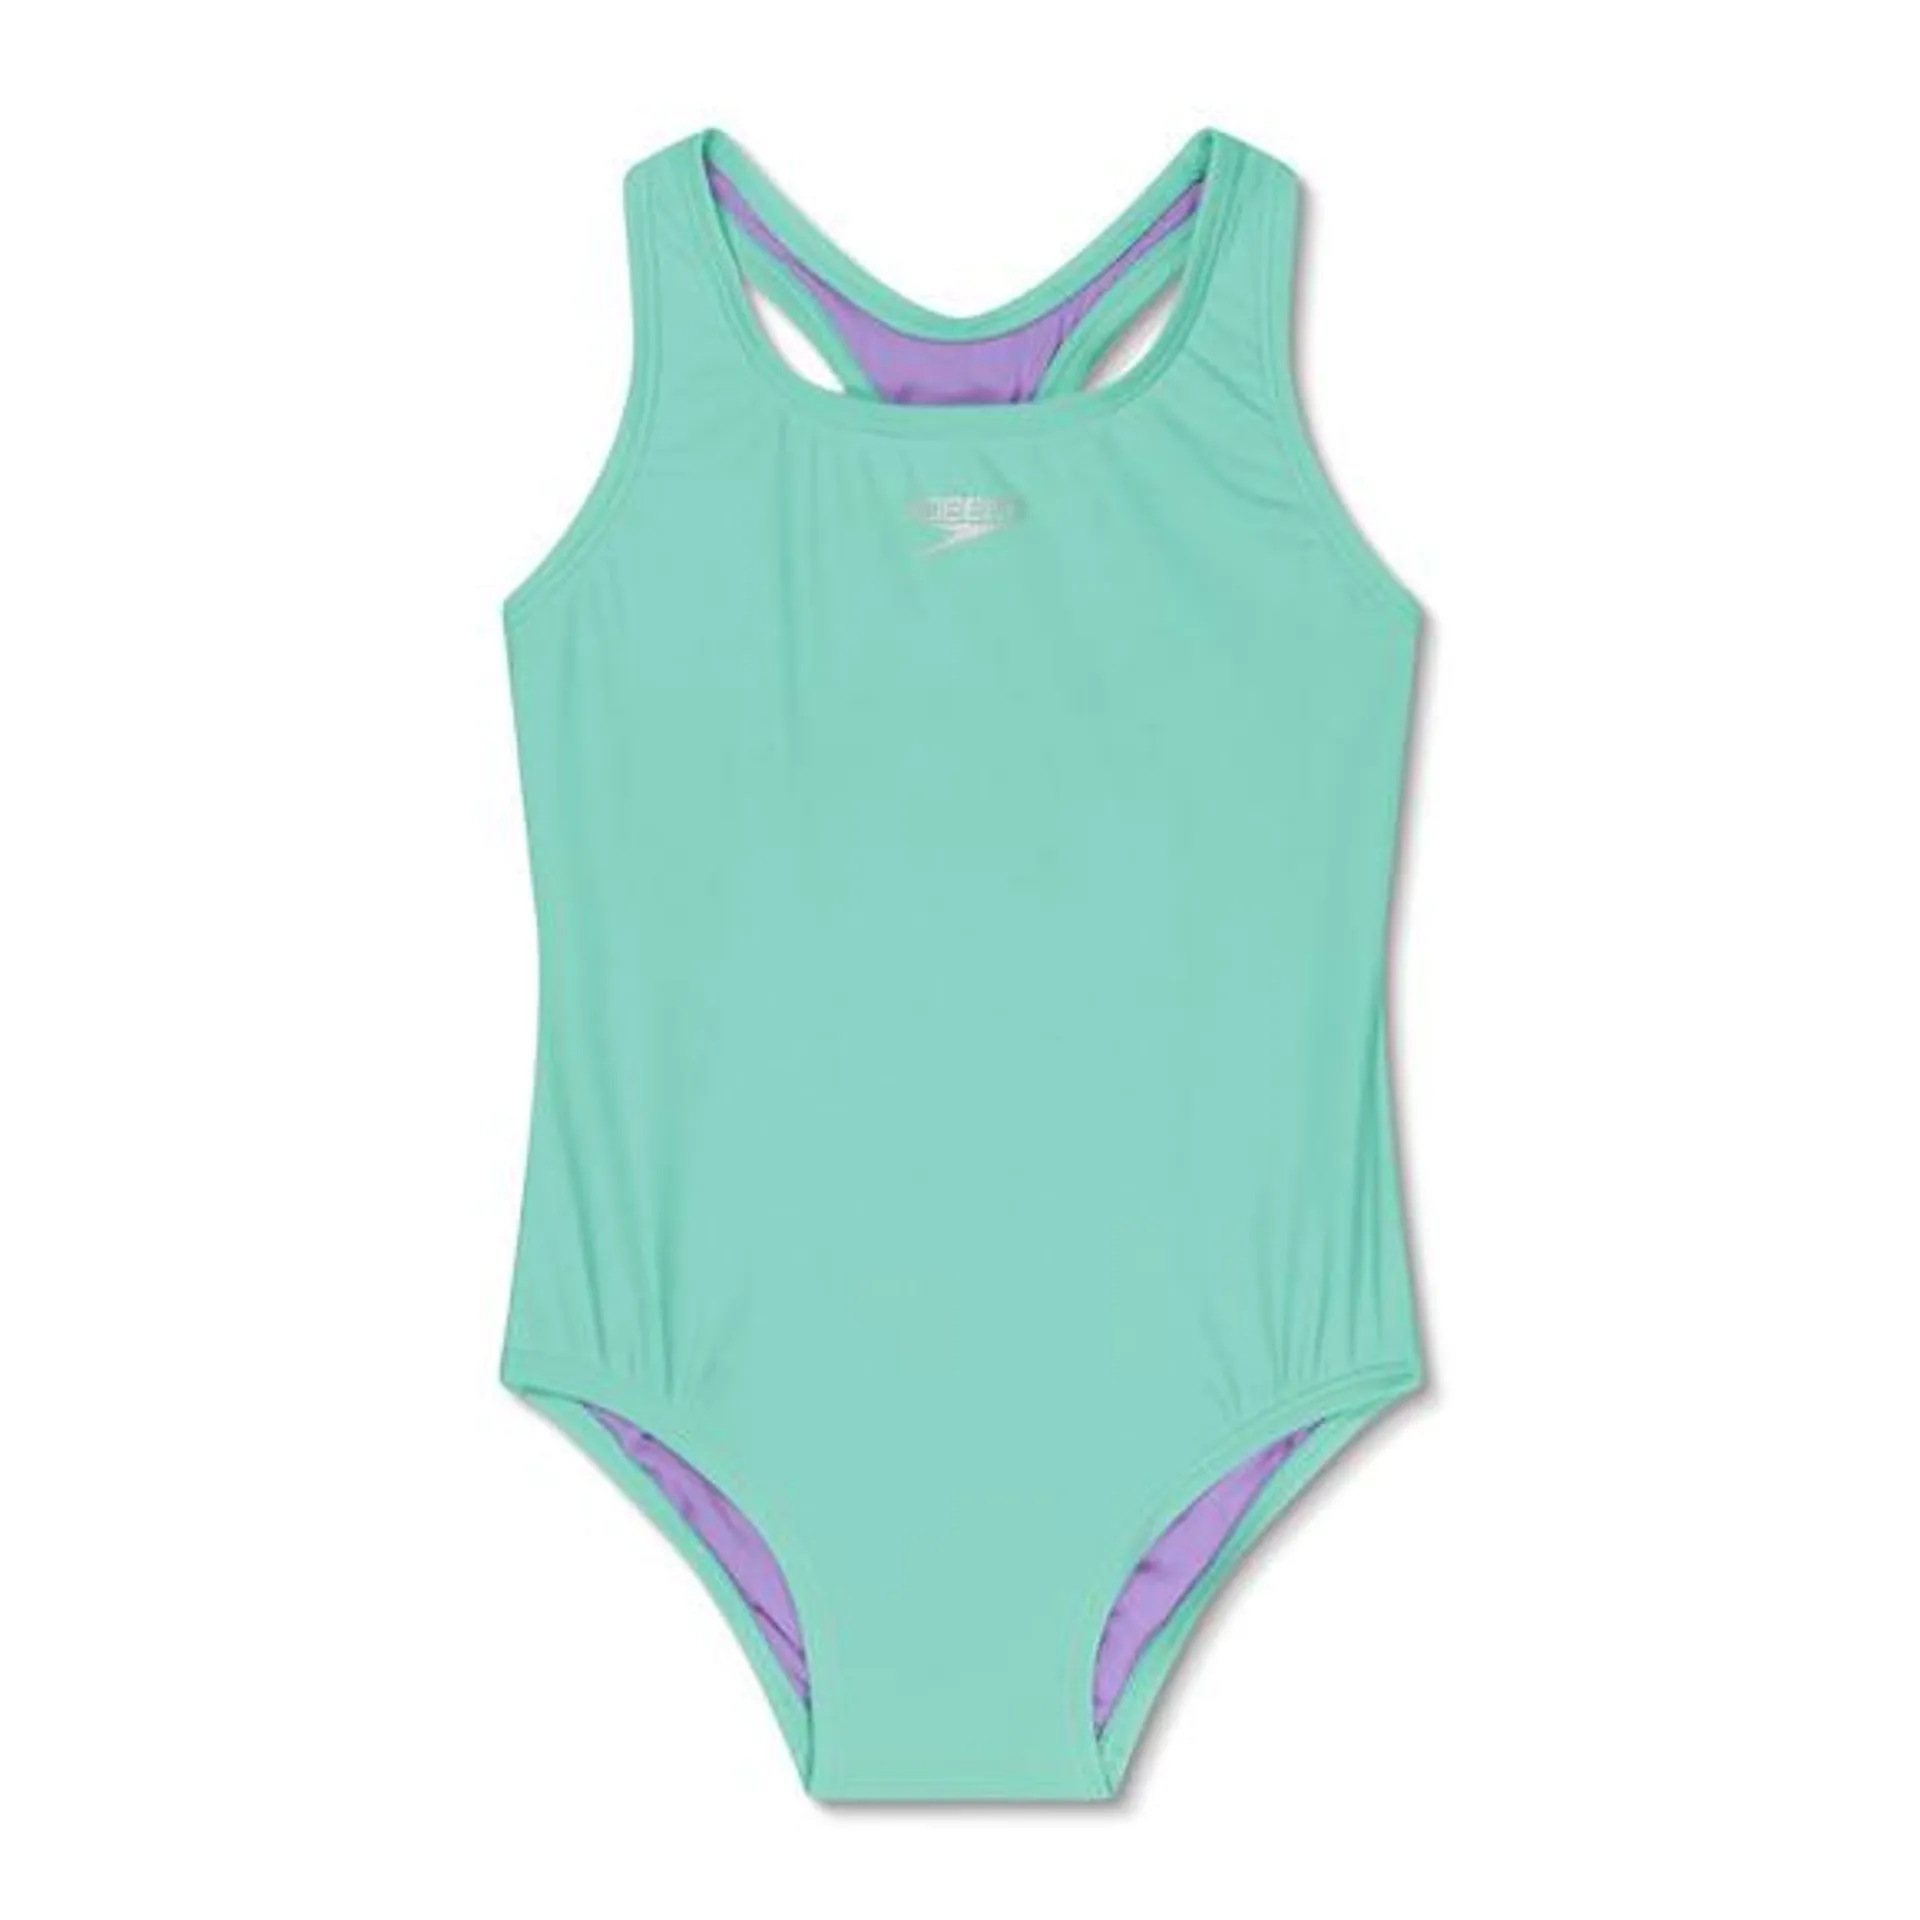 Solid Racerback Jr - Girl's One-Piece Swimsuit